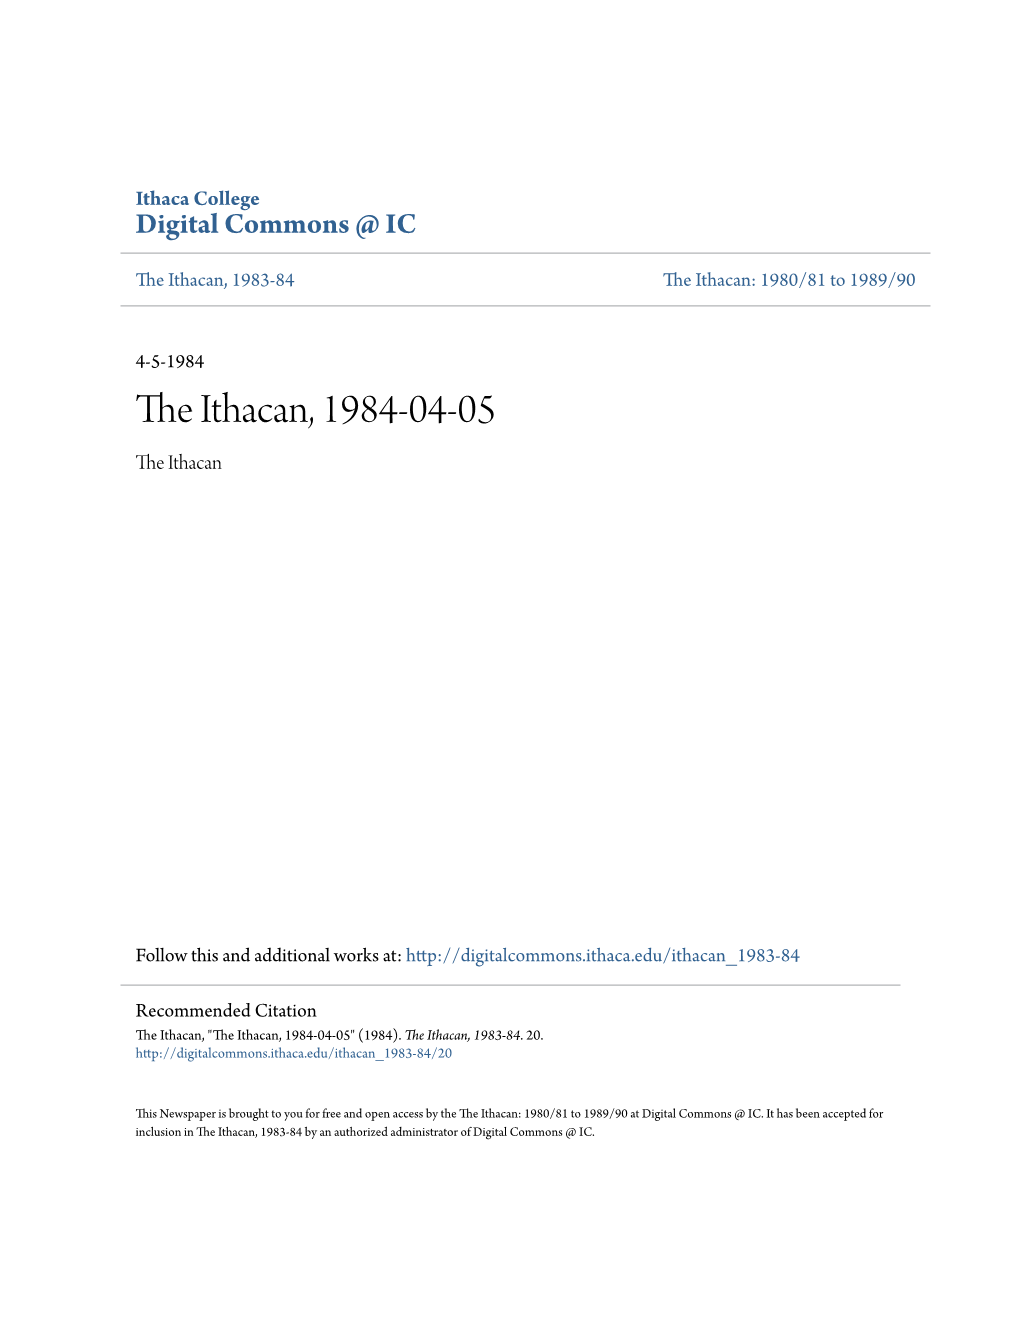 The Ithacan, 1984-04-05